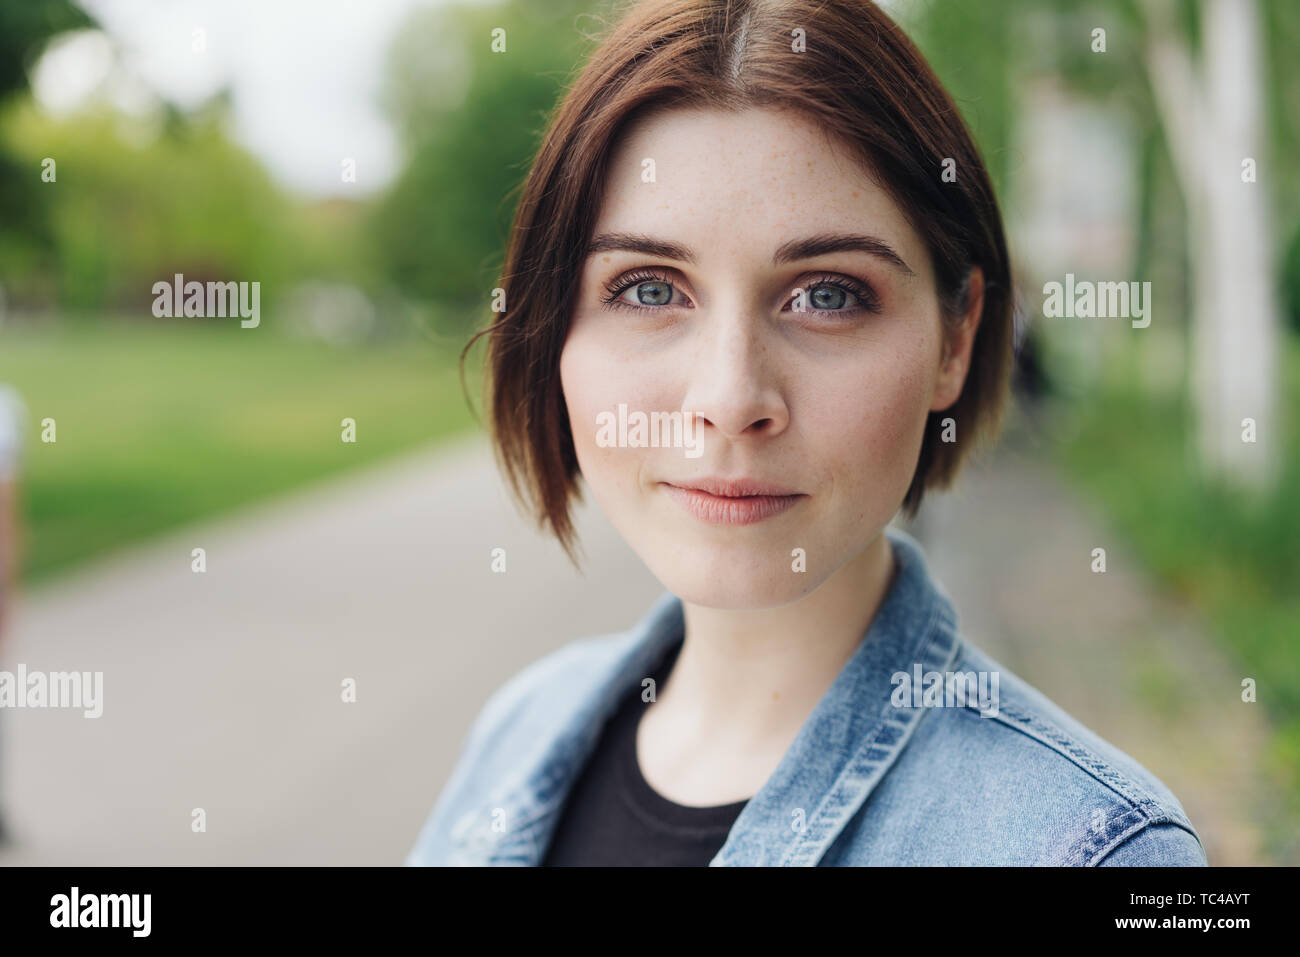 Close up portrait of a thoughtful young woman staring earnestly at the camera with a serious expression outdoors in an urban park Stock Photo